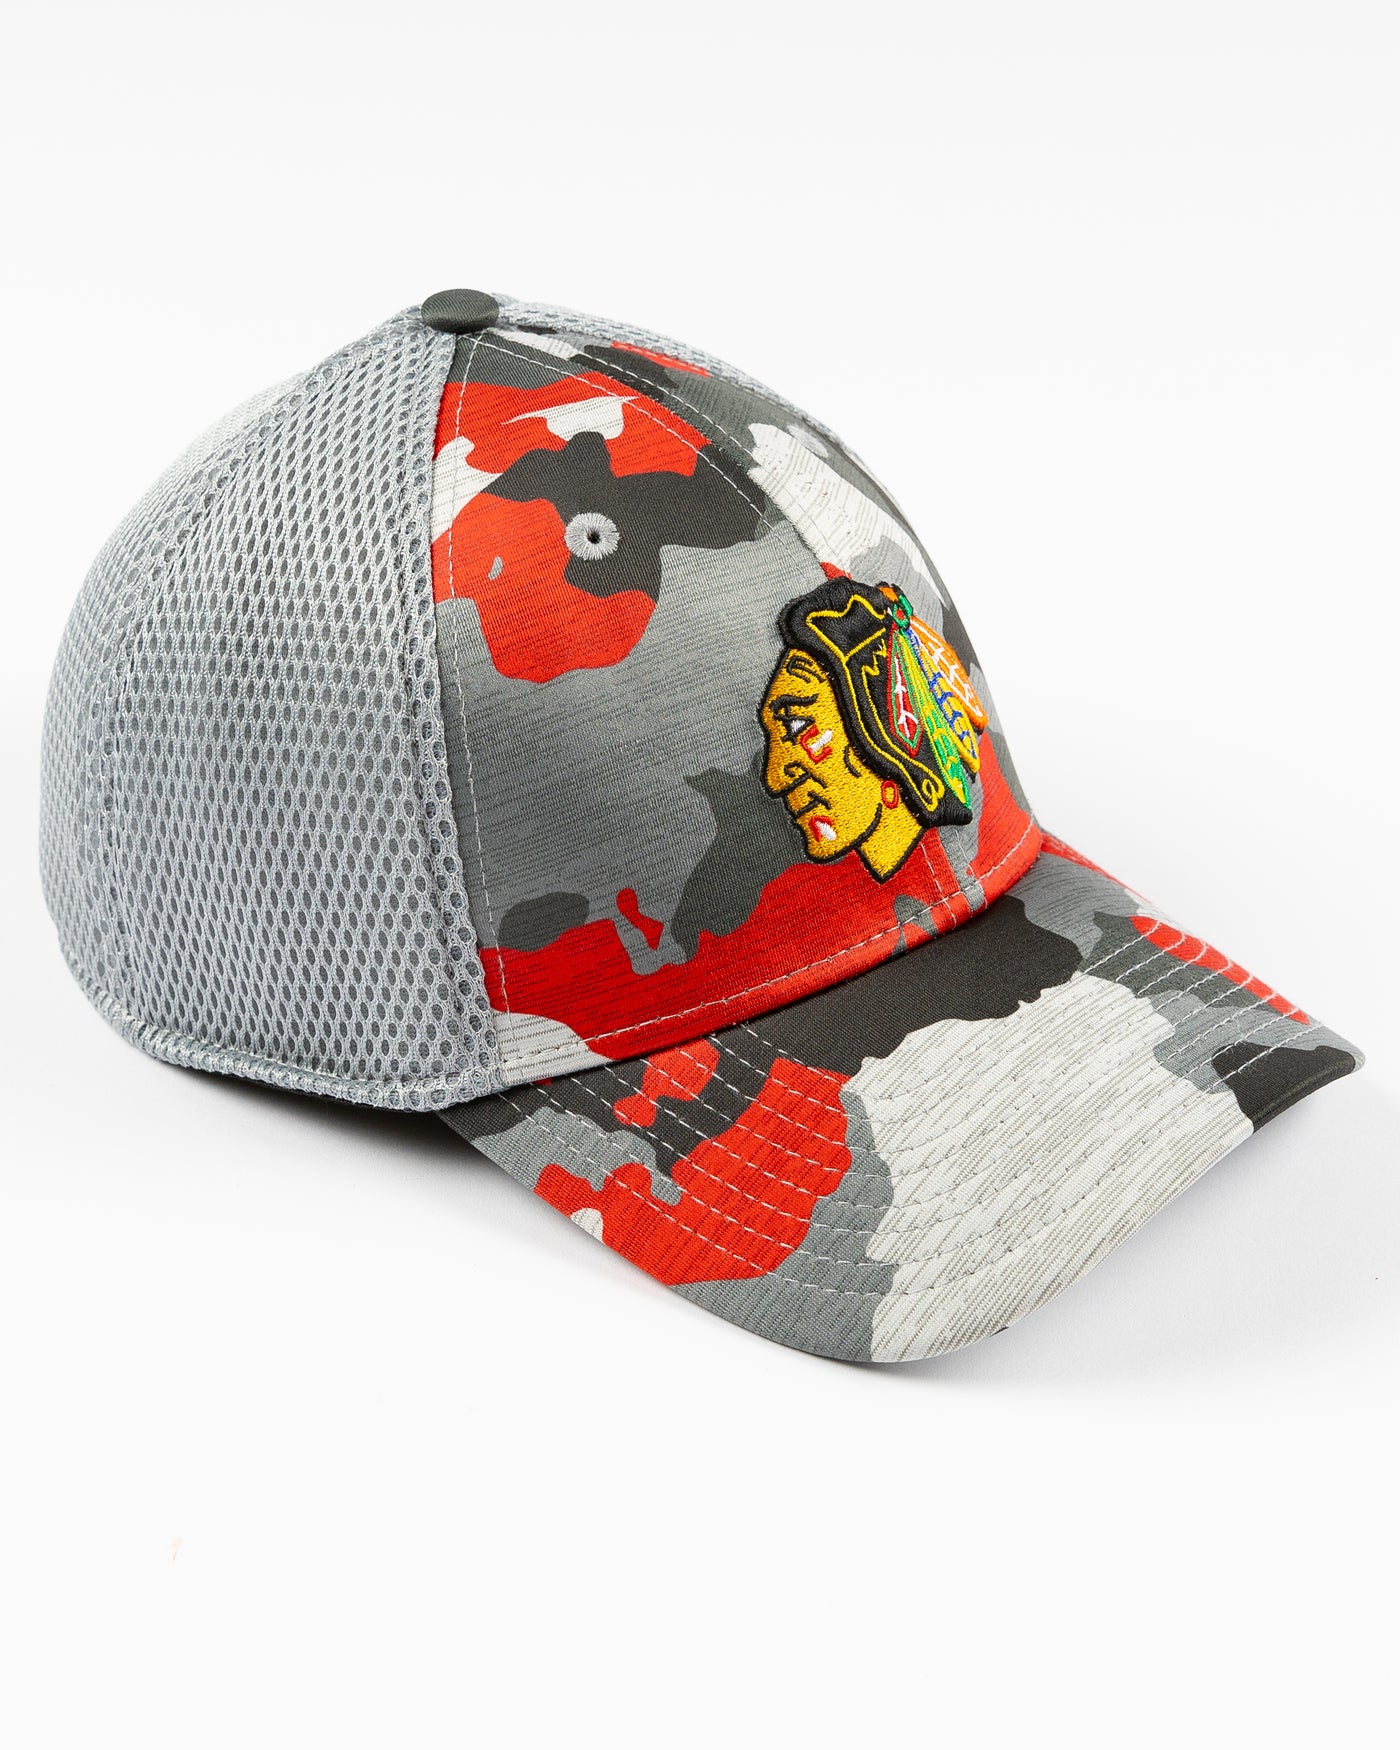 New Era 39THIRTY black, grey and red camo fitted cap with embroidered Chicago Blackhawks primary logo on front - right angle lay flat